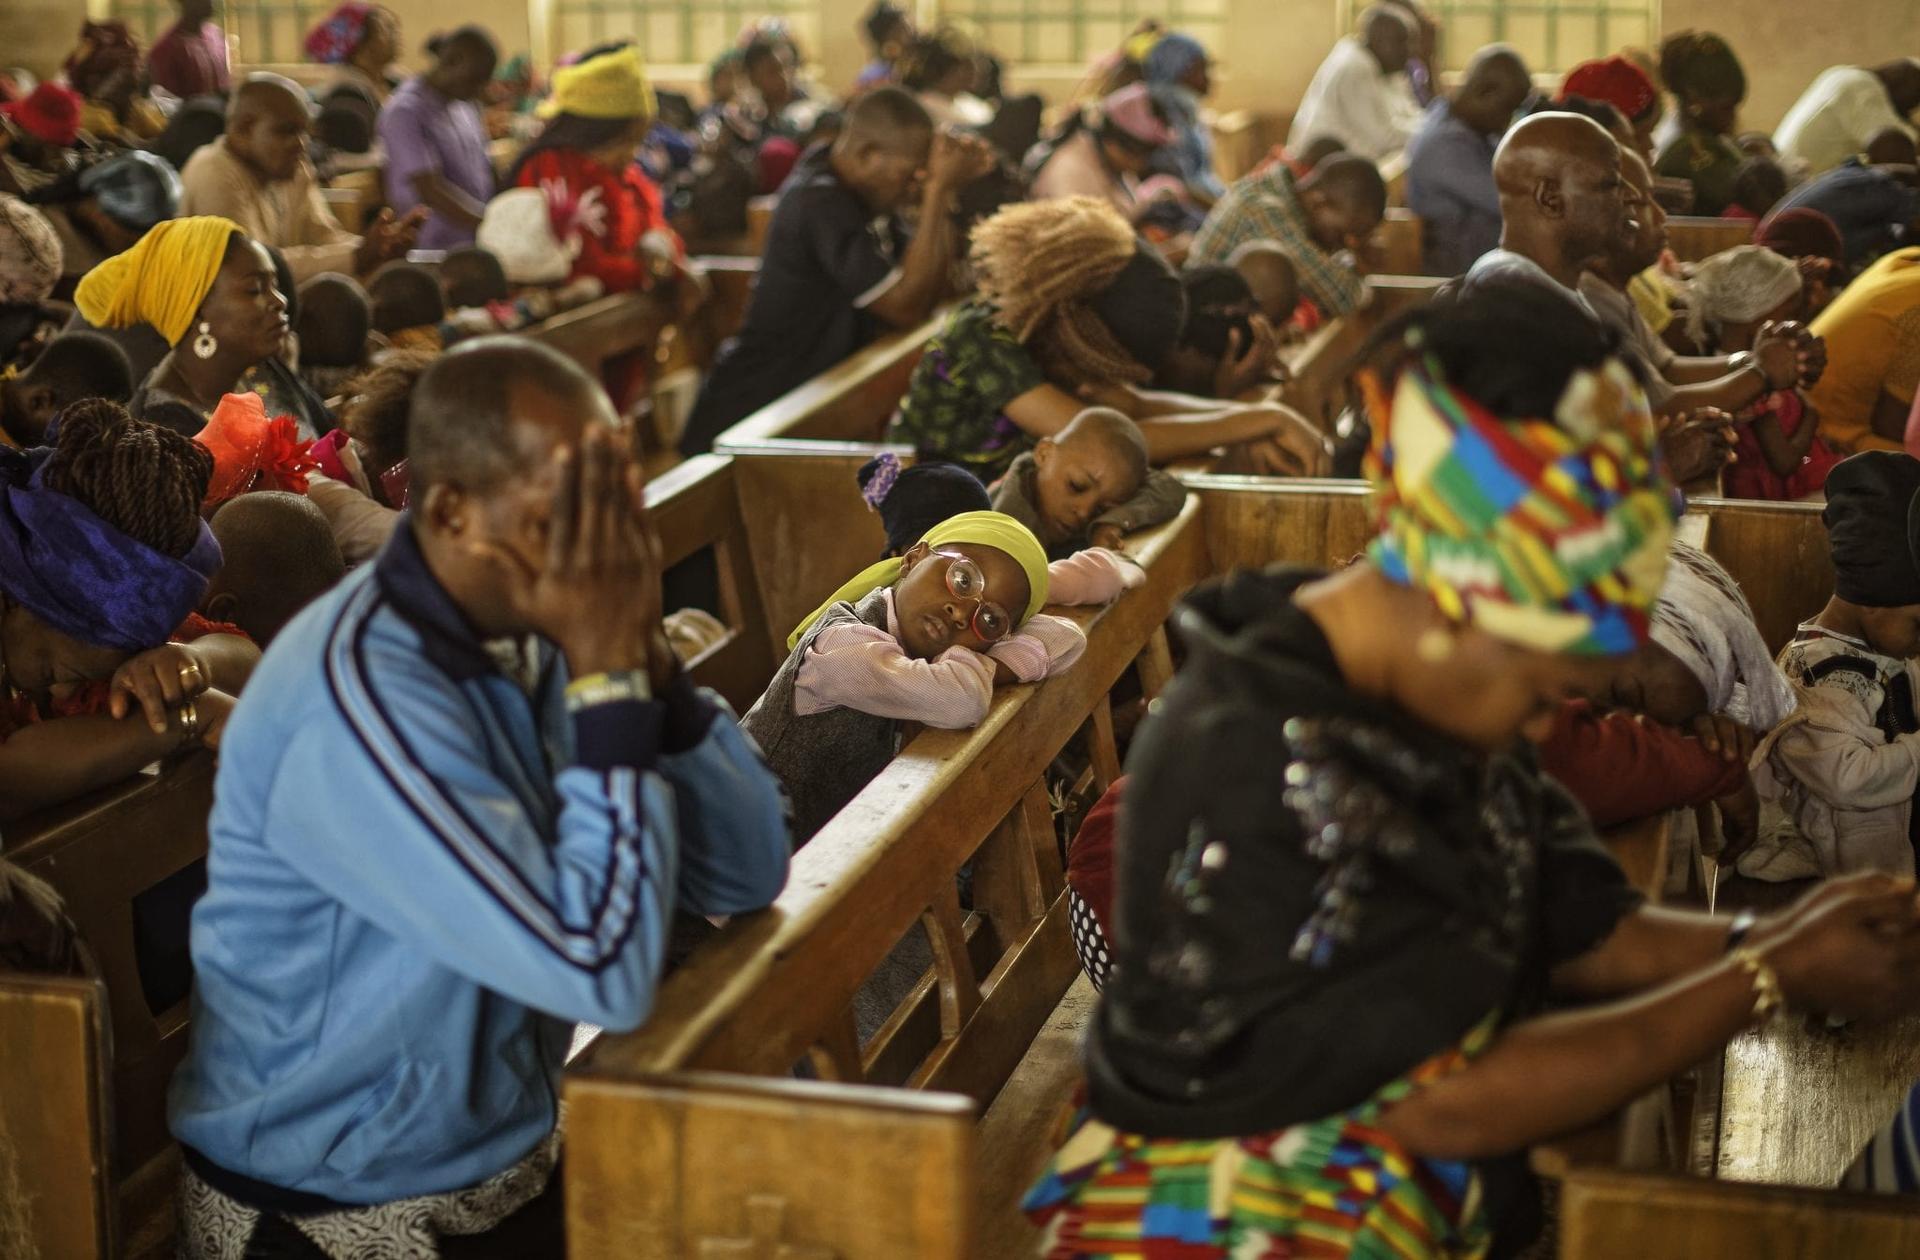 Anti-Christian carnage in Nigeria could be global security nightmare